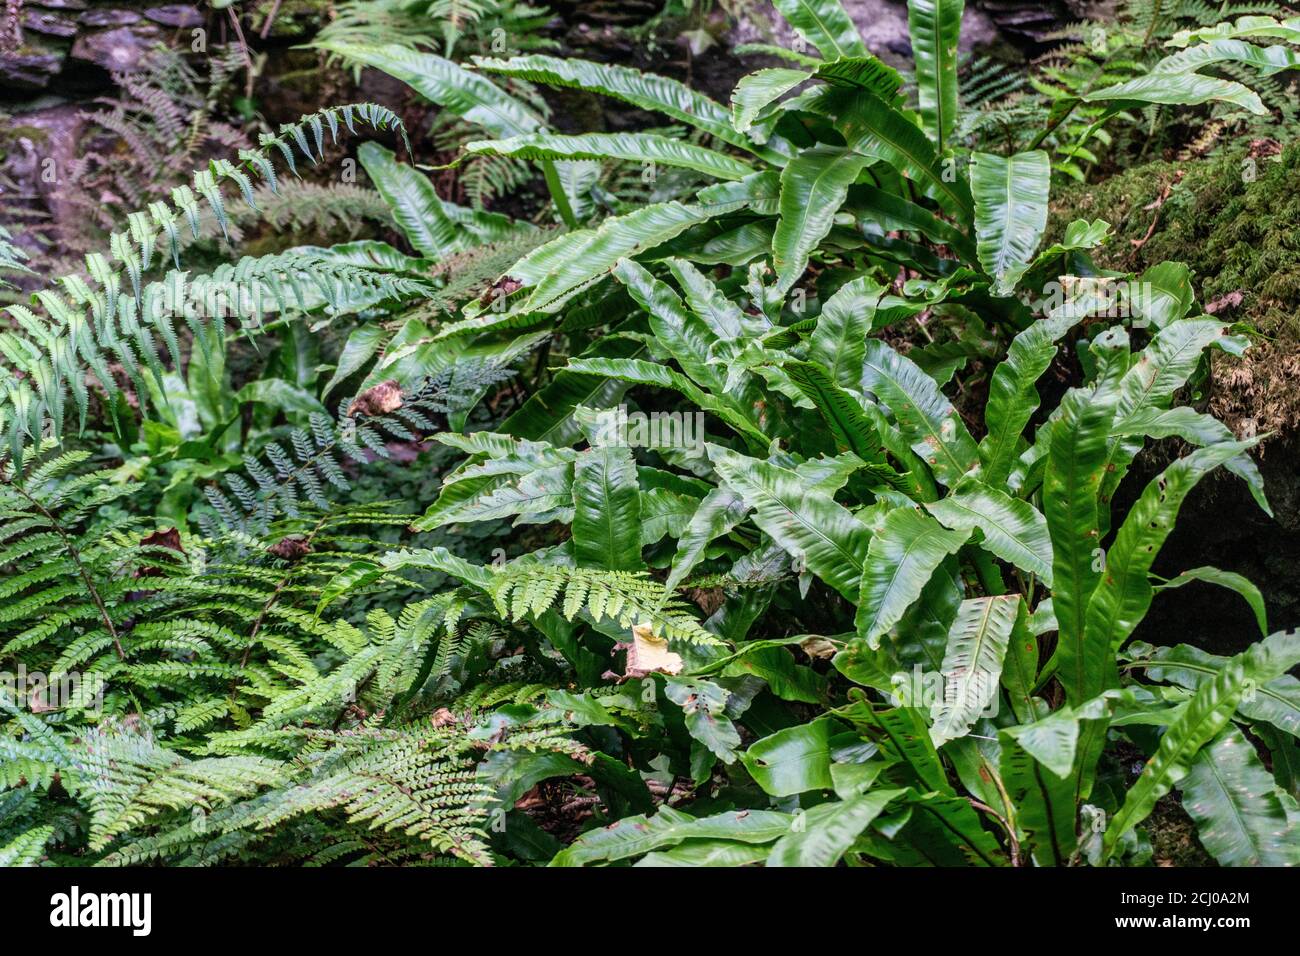 A Harts Tongue Fern on the right in a group of fern trees. Stock Photo